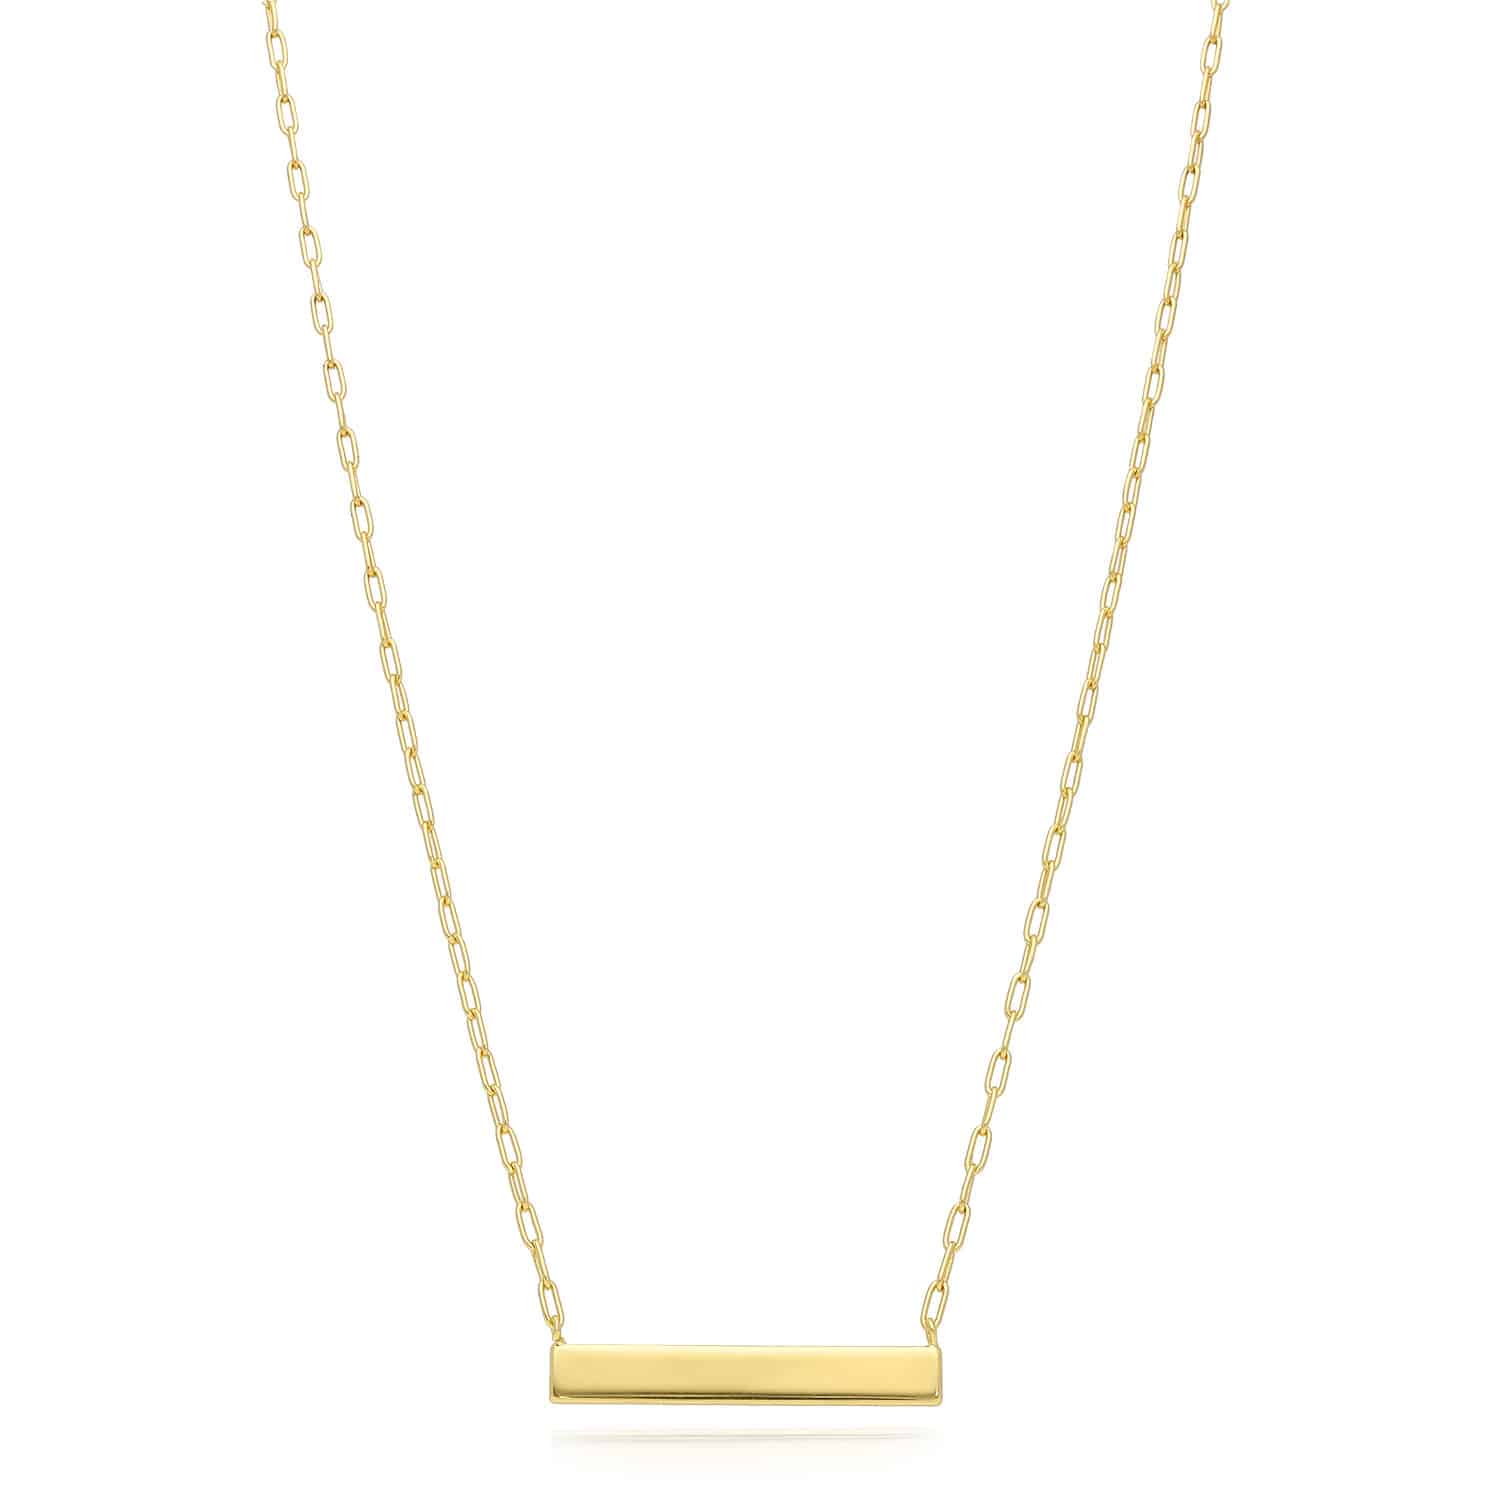 Engravable Gold Over Silver Paperclip Personalized Bar Pendant Necklace 16"-18" - Yellow Gold Plated